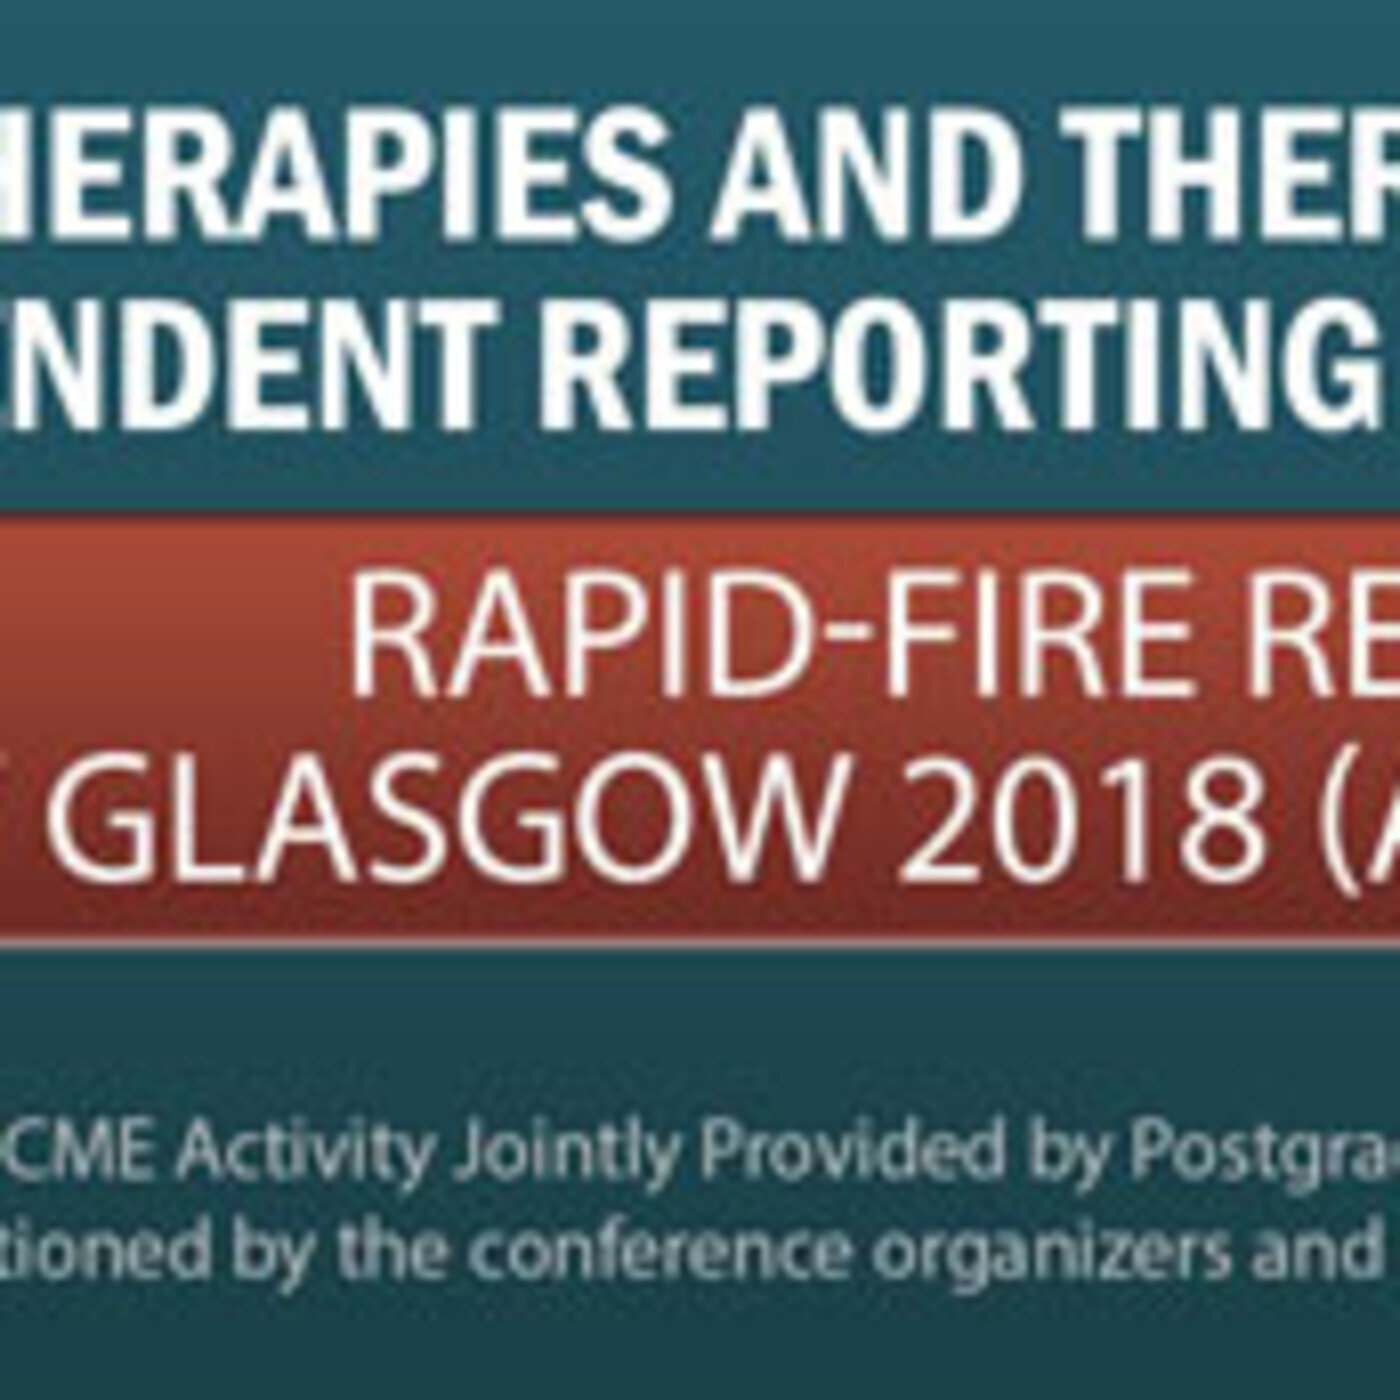 Rapid Fire Review of HIV Glasgow 2018